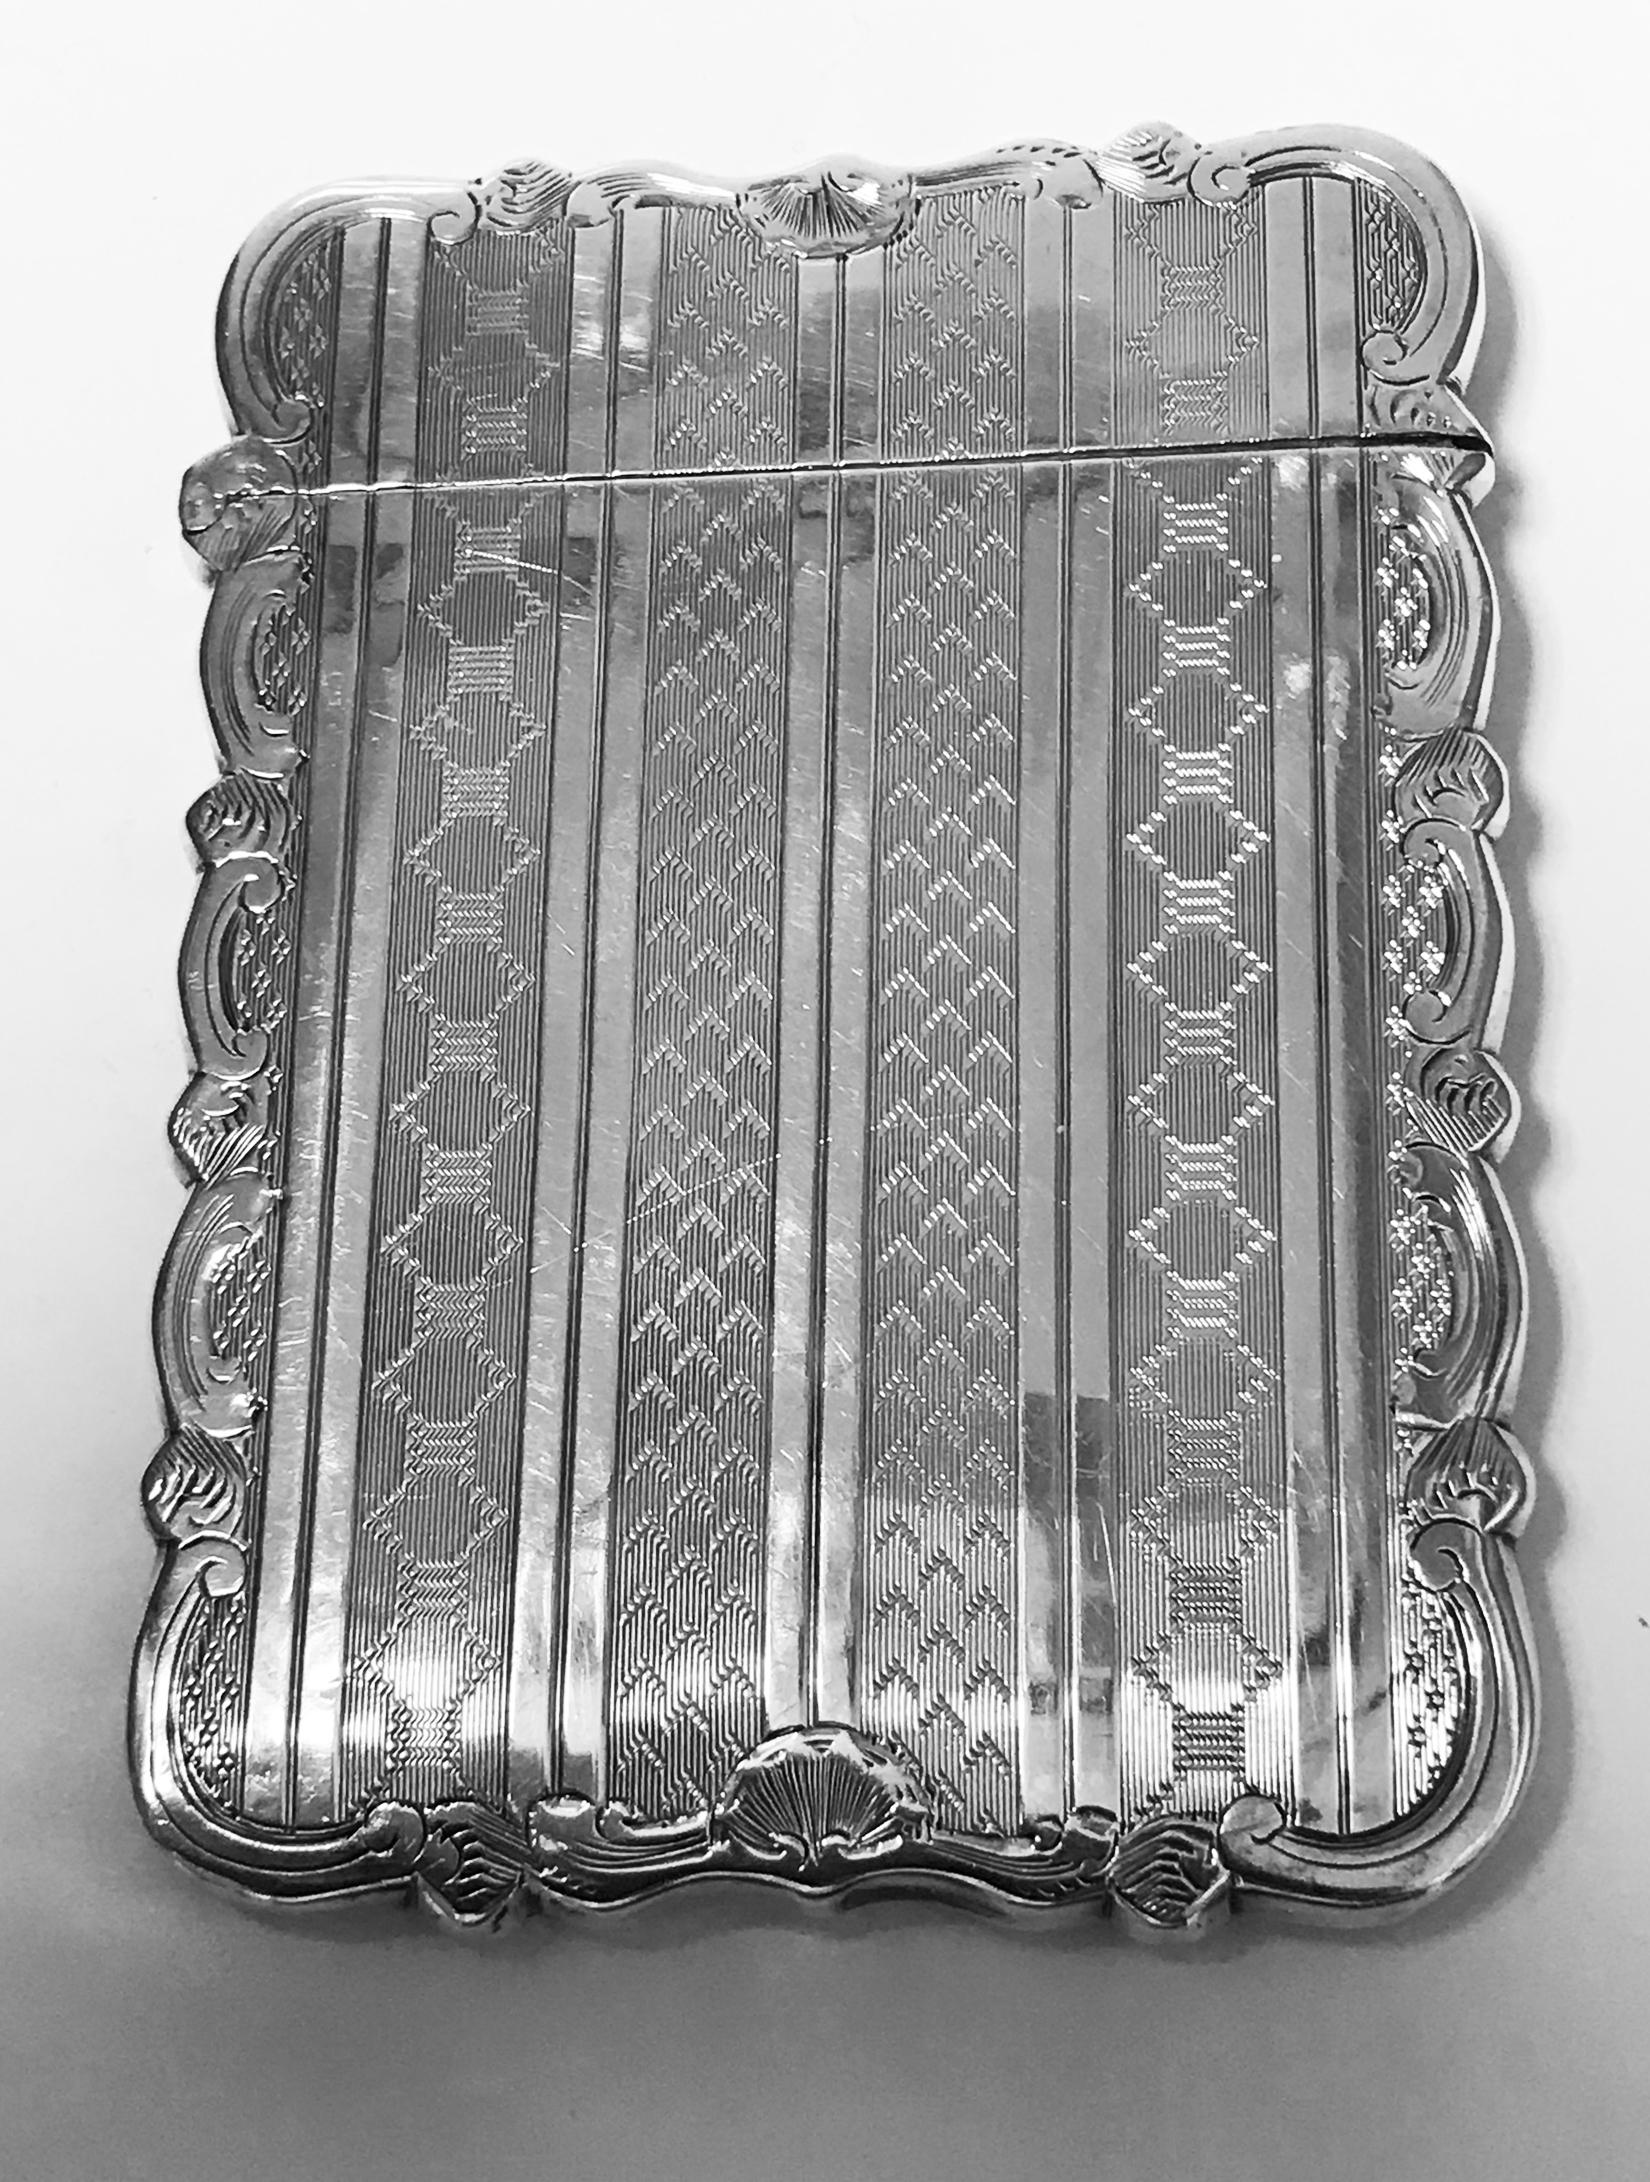 Antique sterling silver card case, Birmingham 1866 Hilliard and Thomason. The card case rectangular form engraved panels design centering engraved cartouche with scroll foliage edging, hinged cover. Measures: 9.50 x 7.00 cm. Total item weight: 54.89